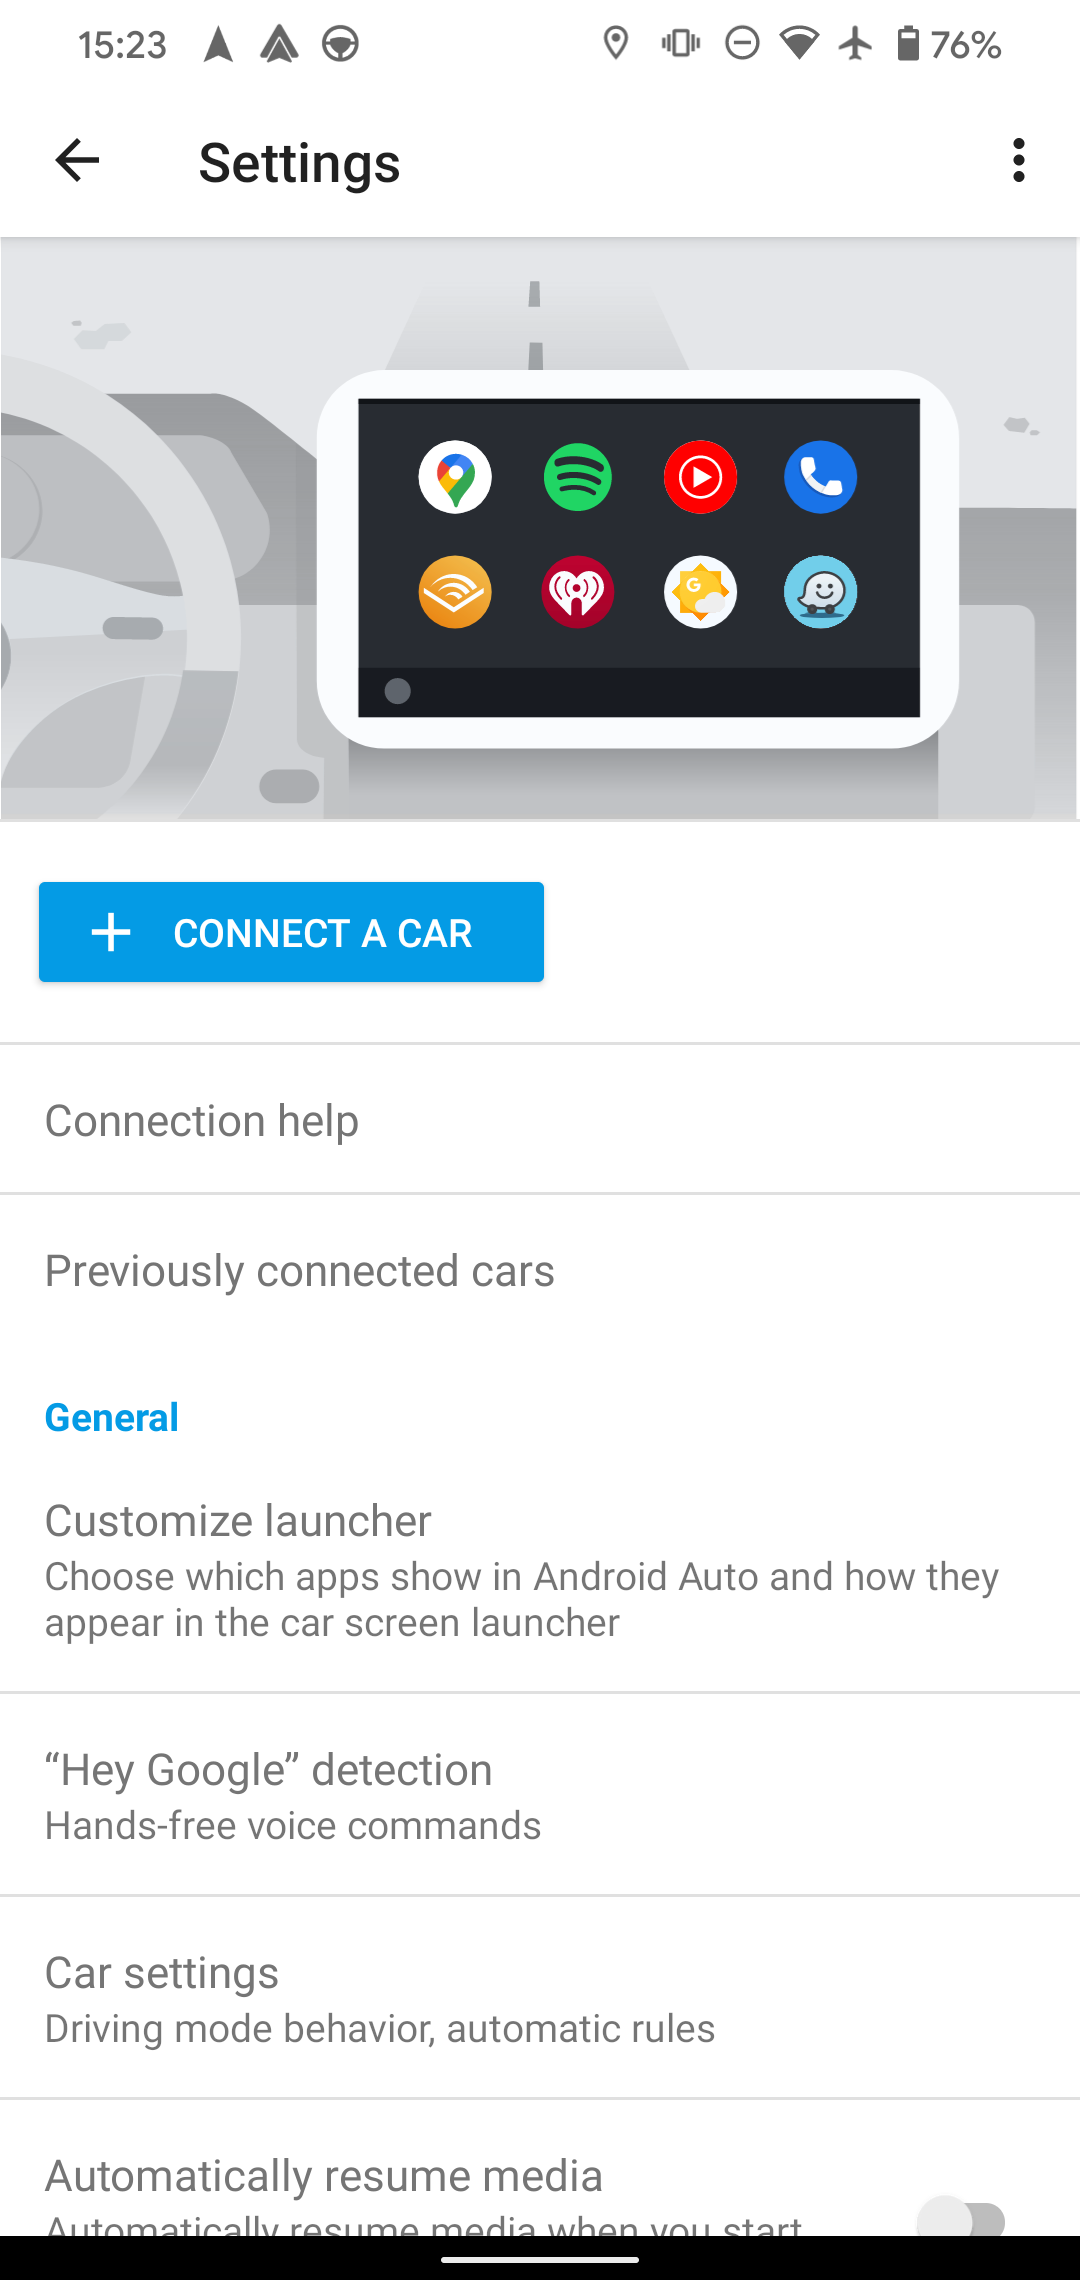 Android Auto Not Reading Messages? These Fixes Could Help - autoevolution